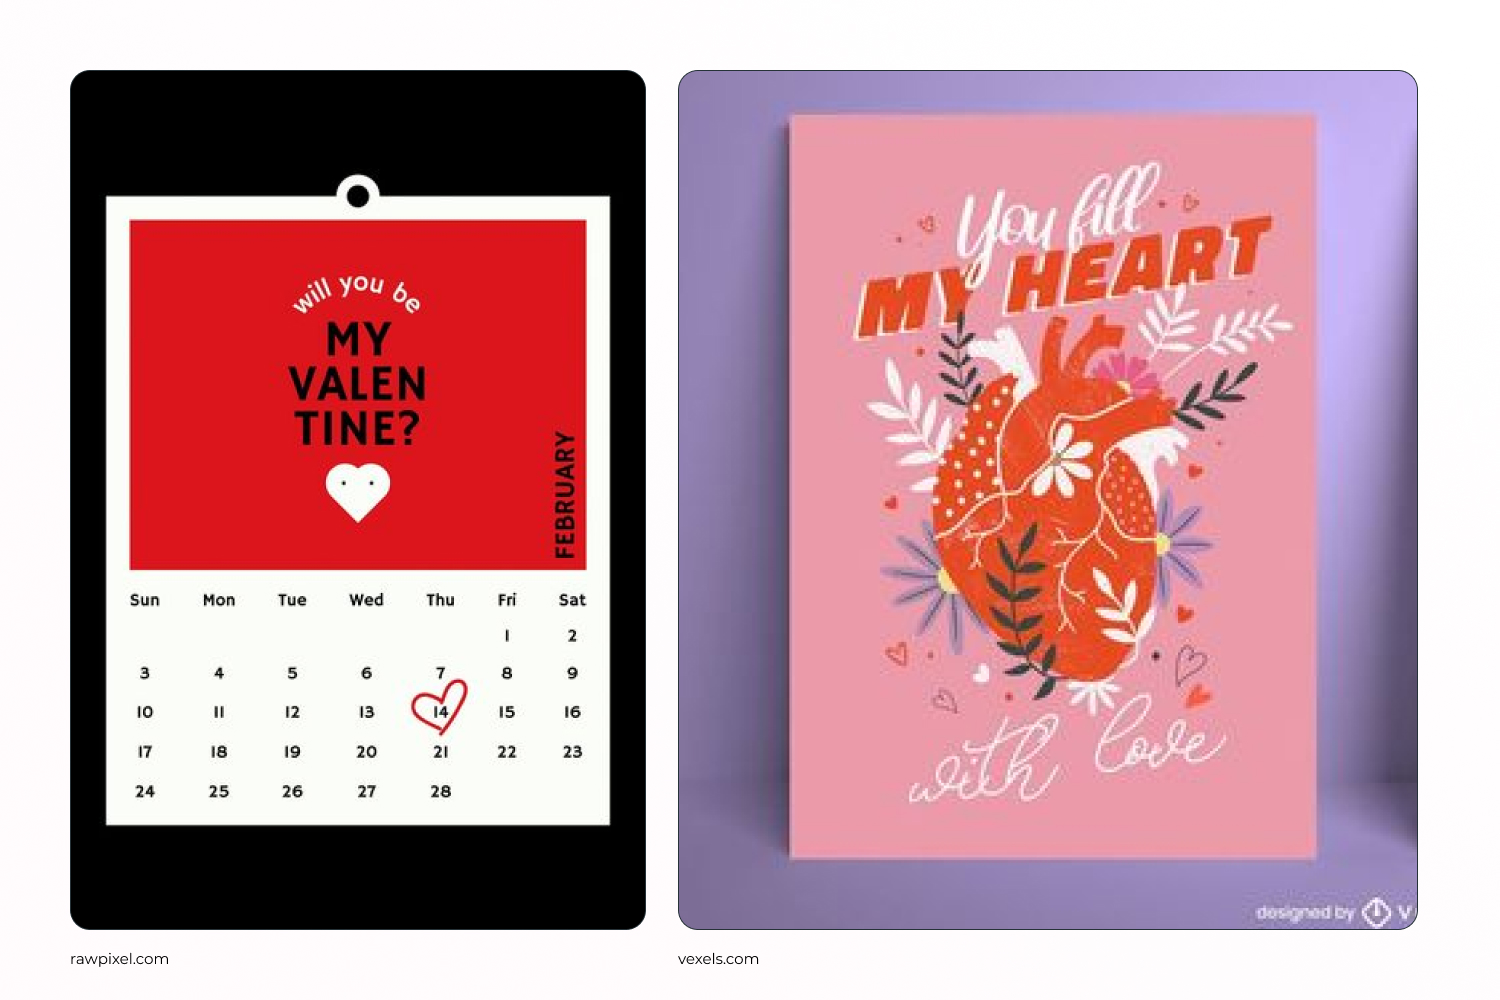 Collage of a calendar with a red picture and a heart in flowers.